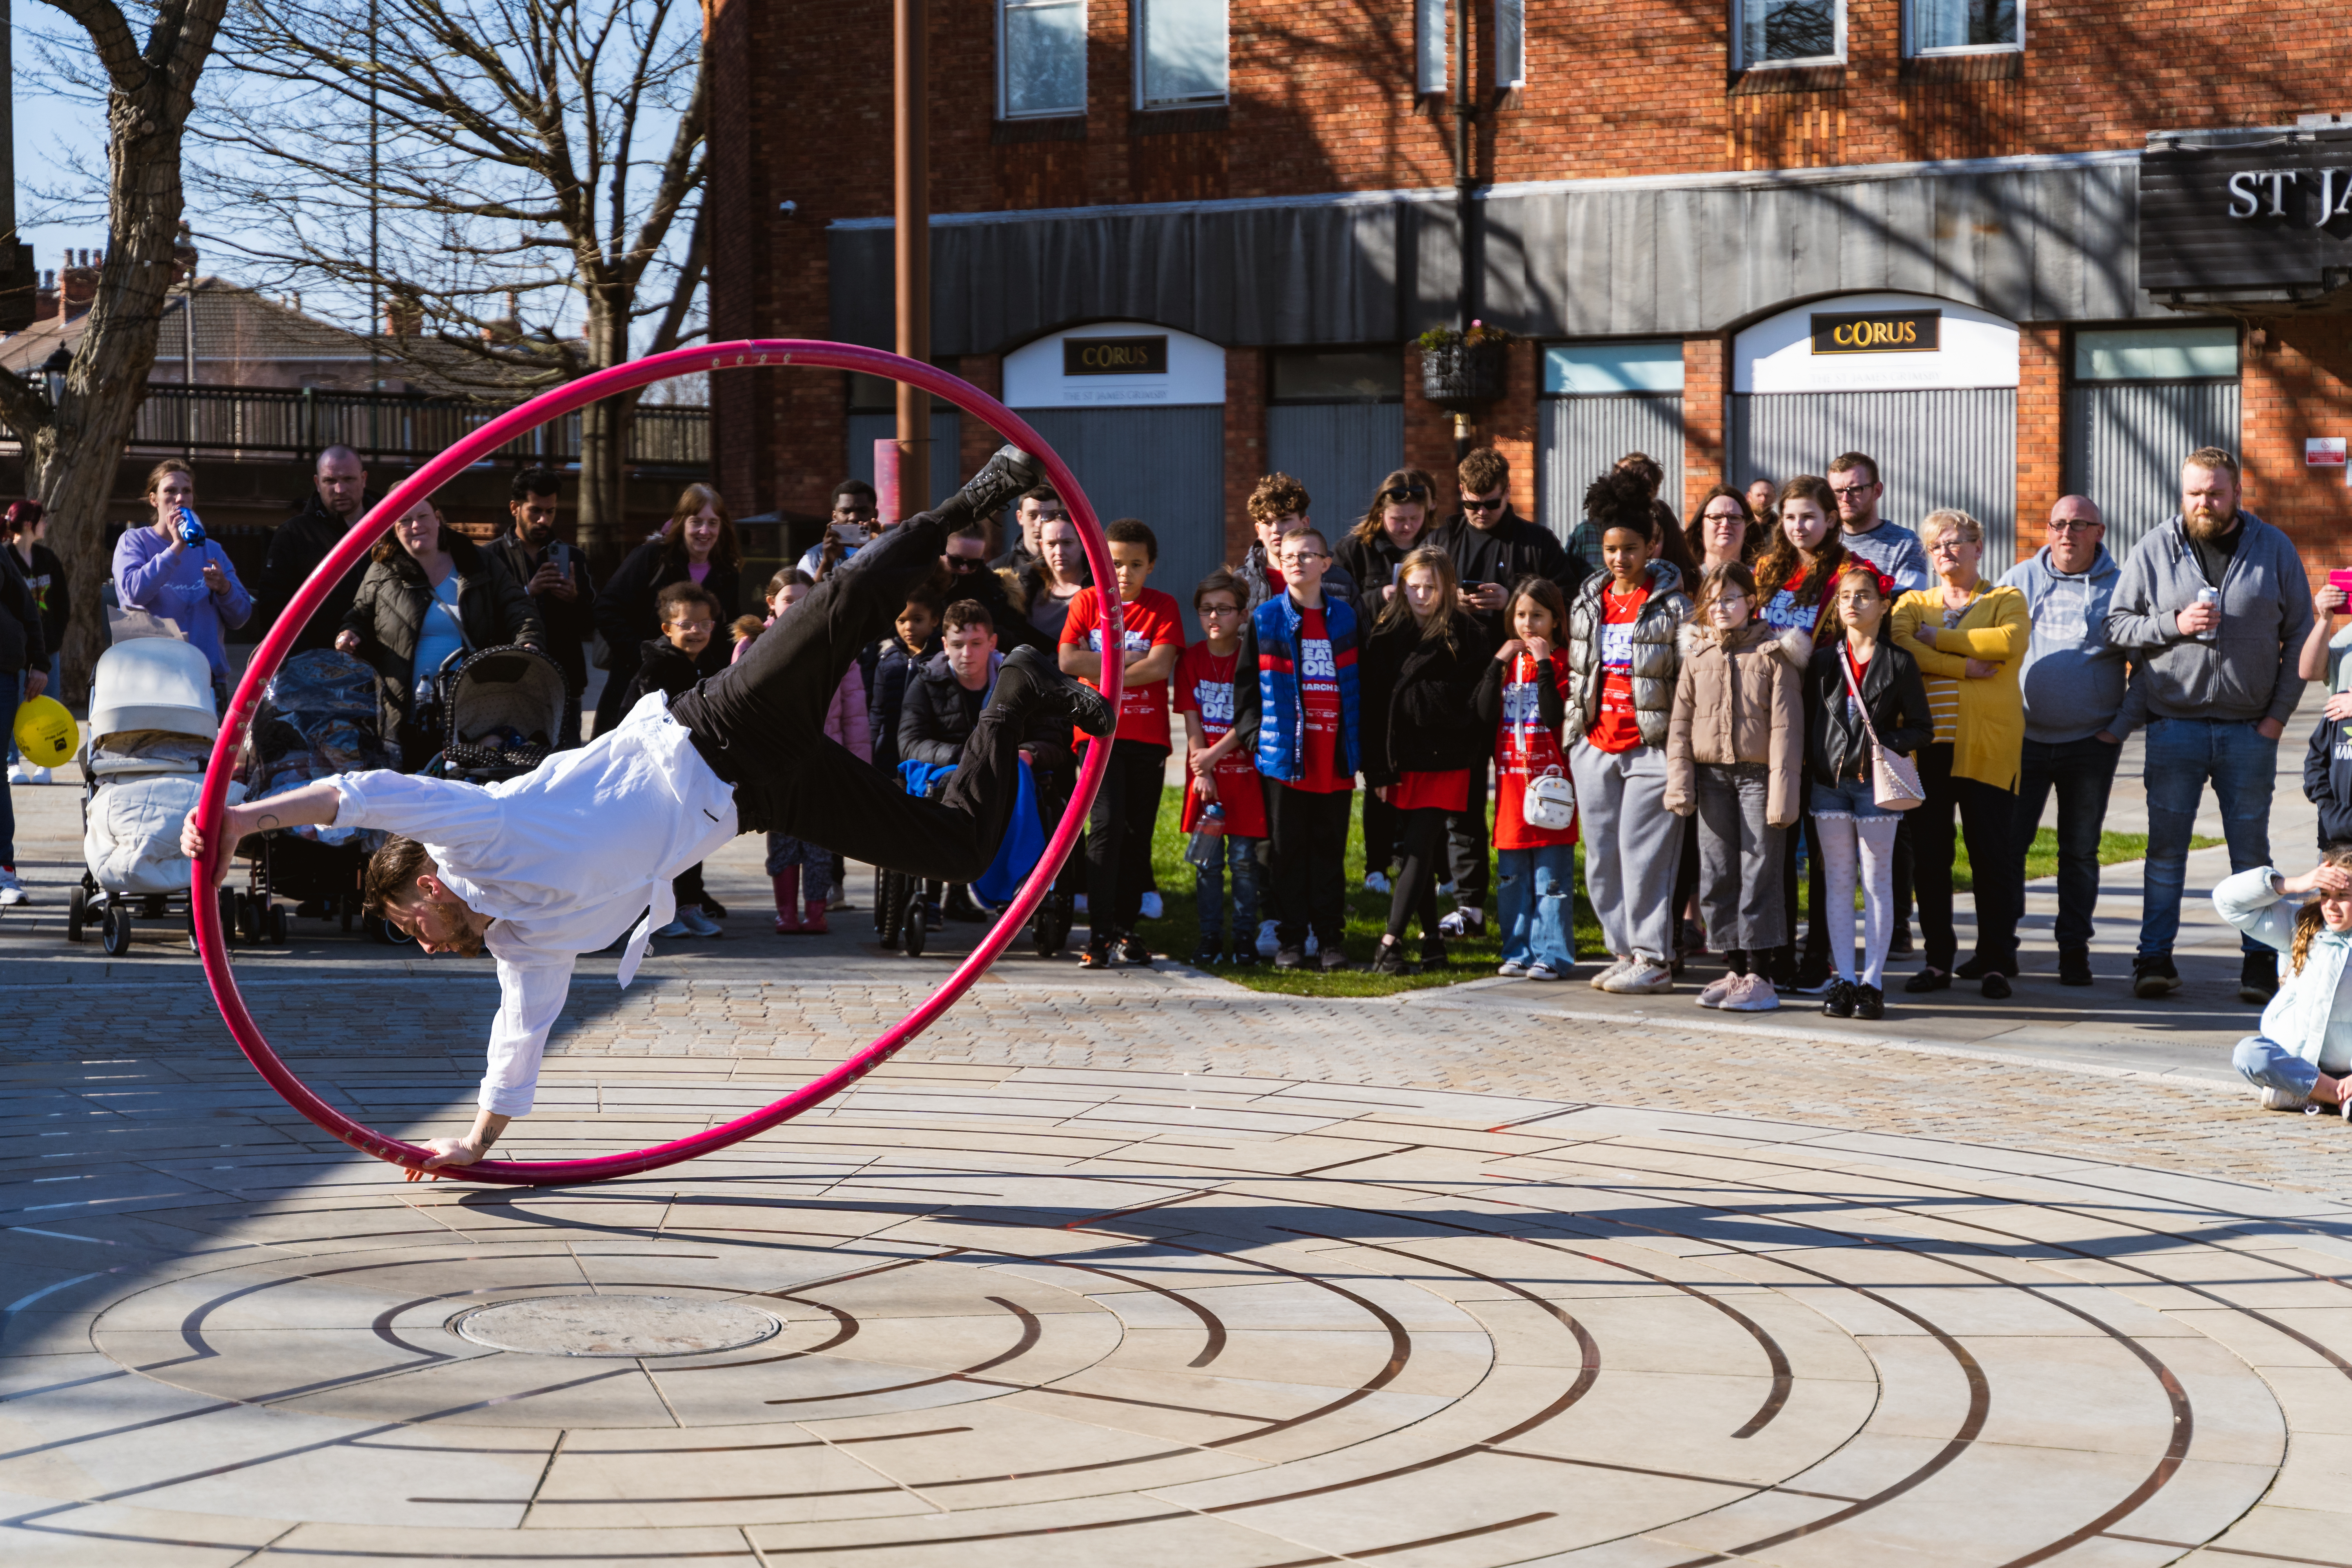 Man spinning in a large hoop with audience watching the performance in the background.